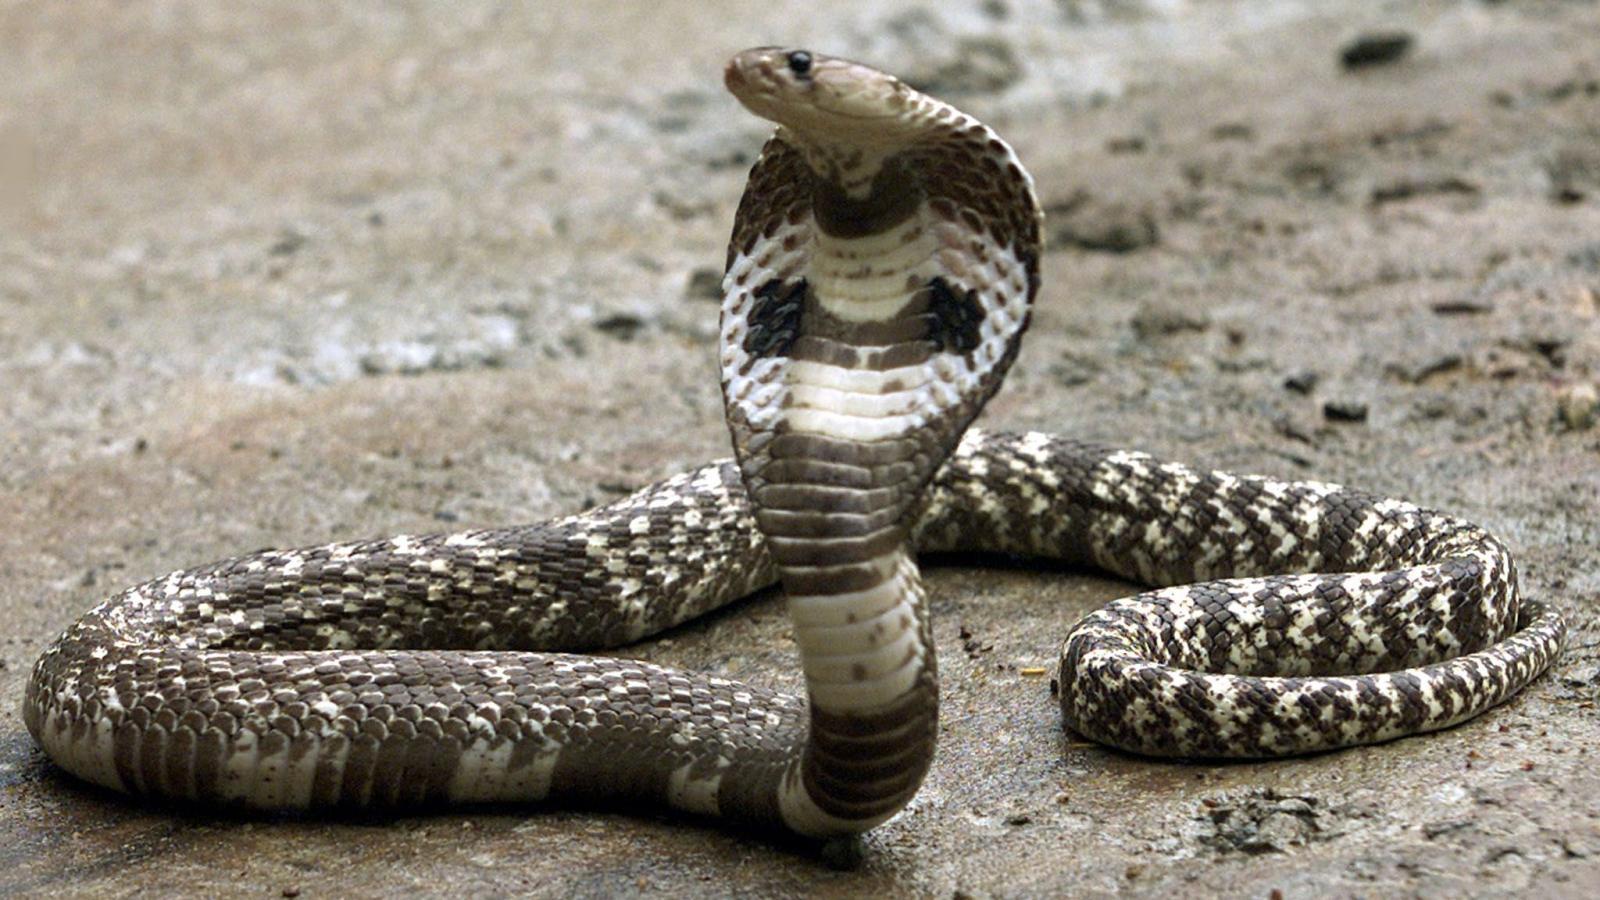 The World Health Organization is deeply worried about snake bites